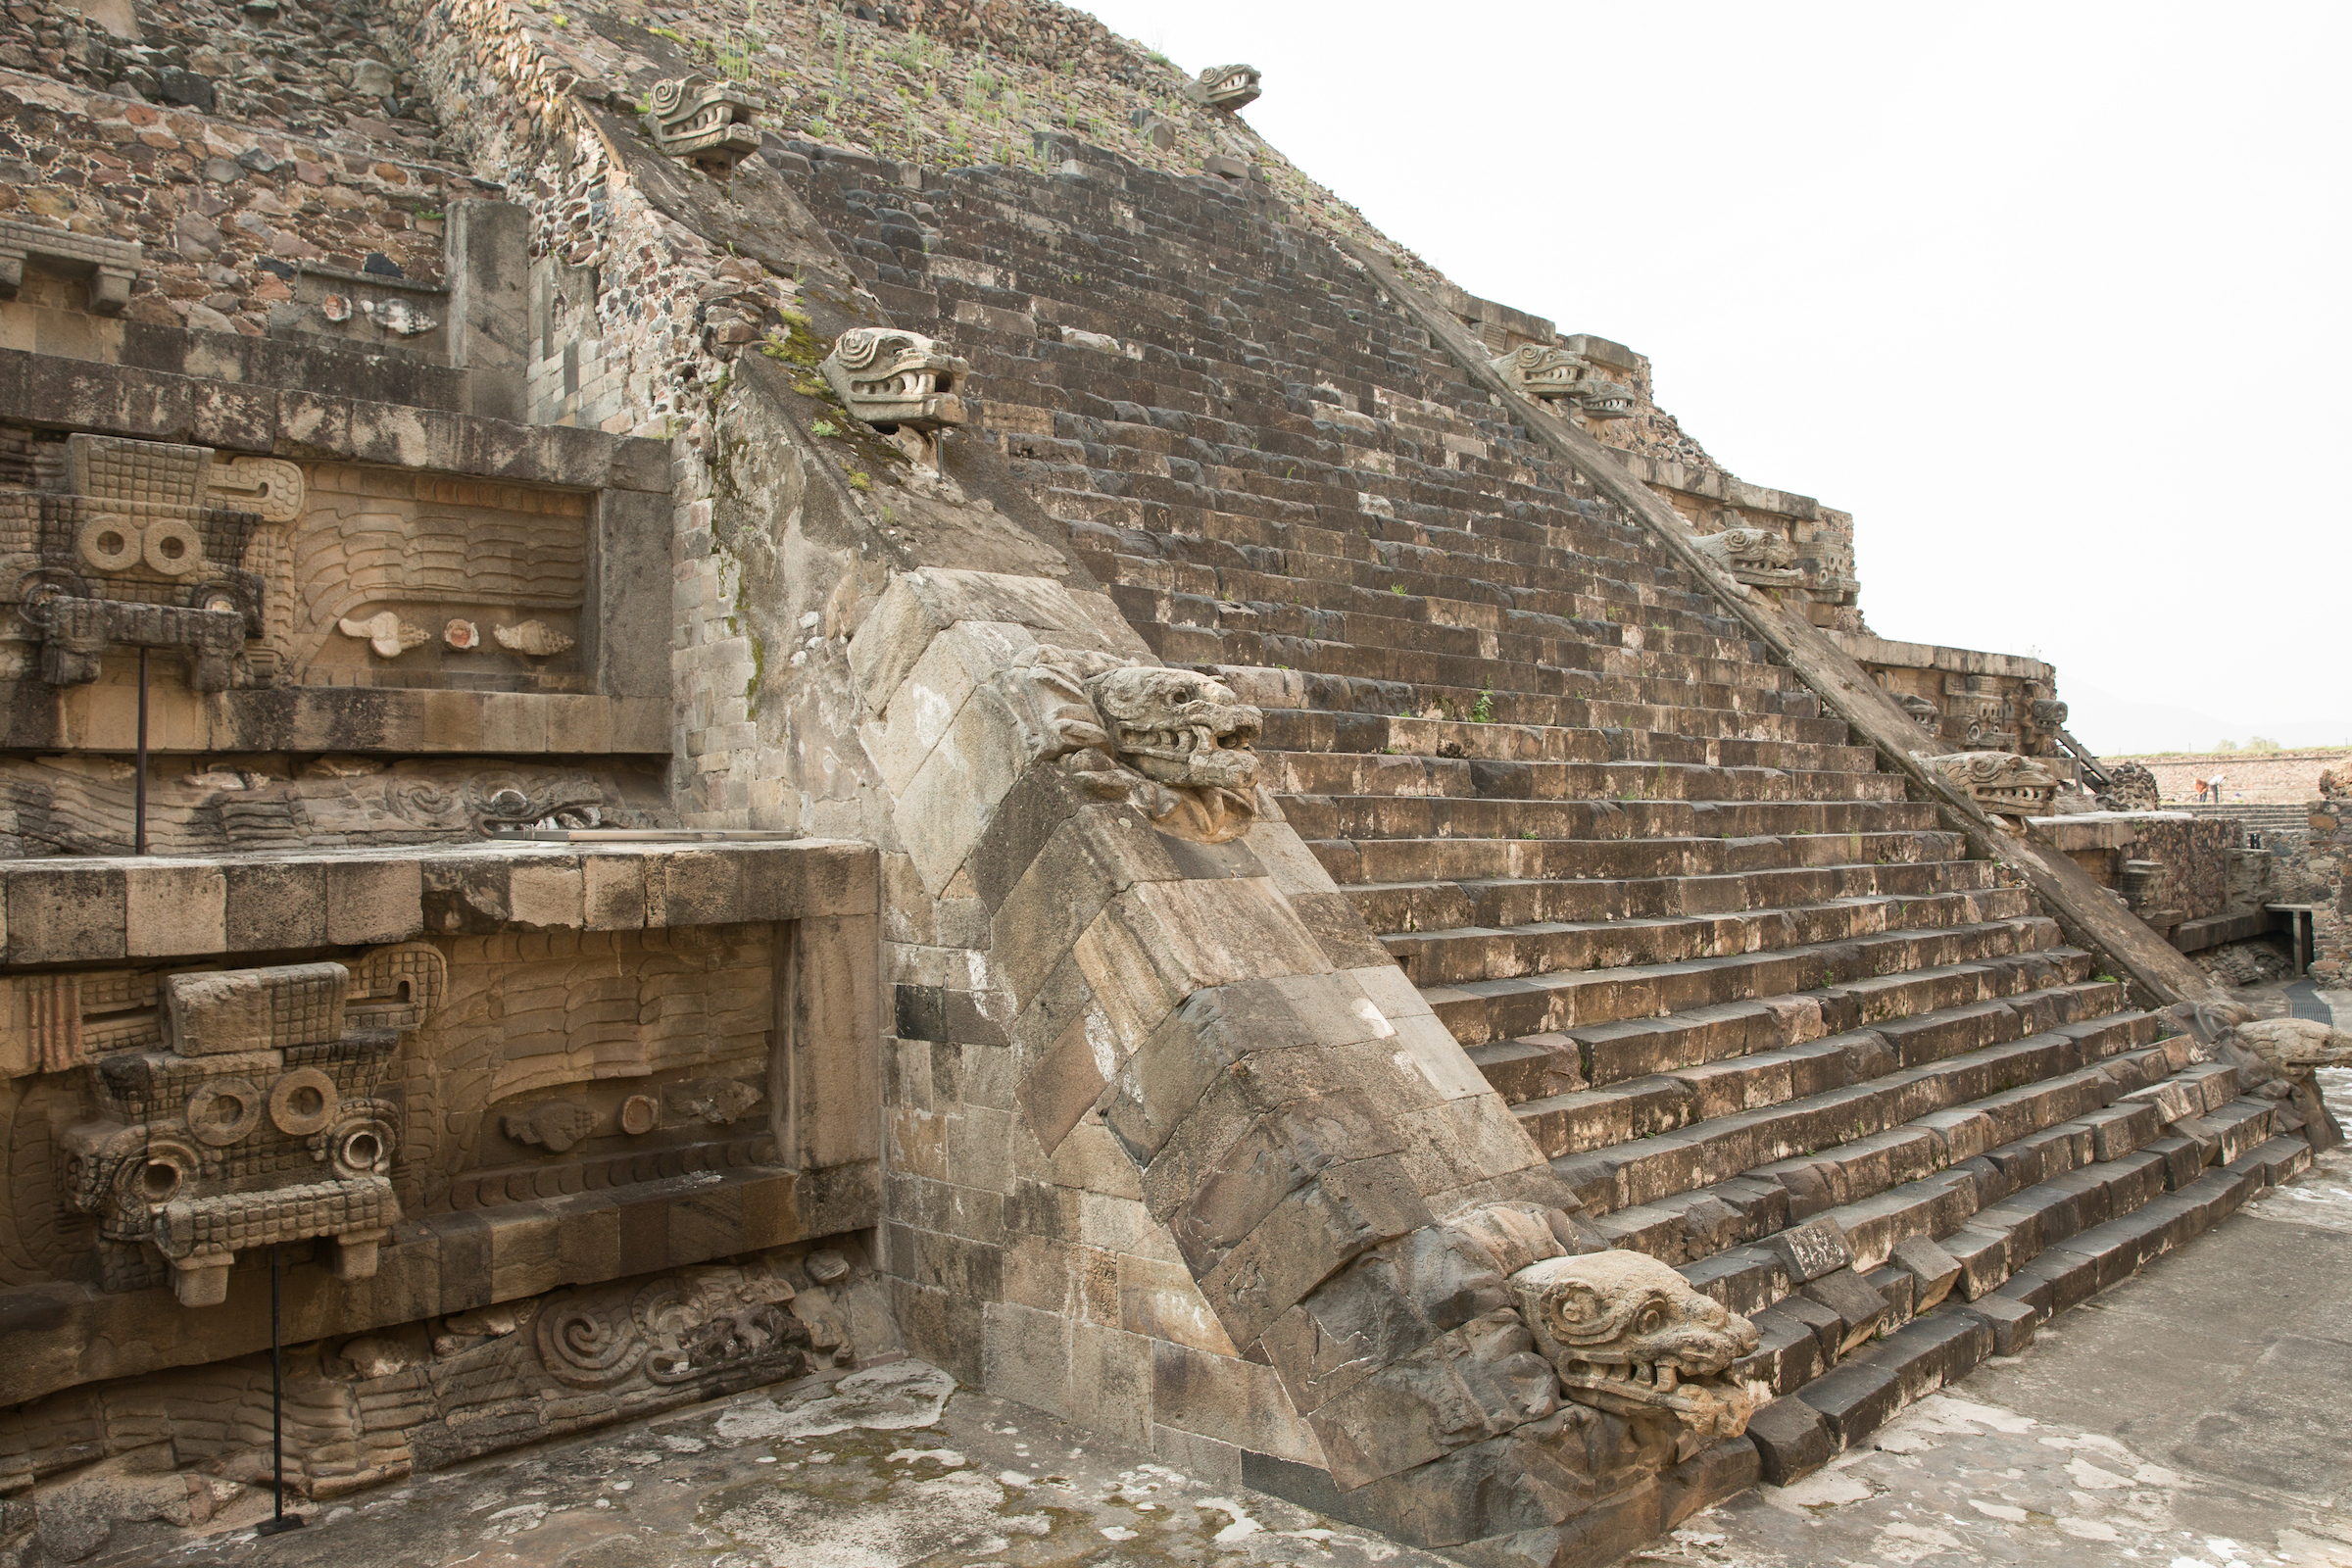 Details on a pyramid at Teotihuacan in Mexico